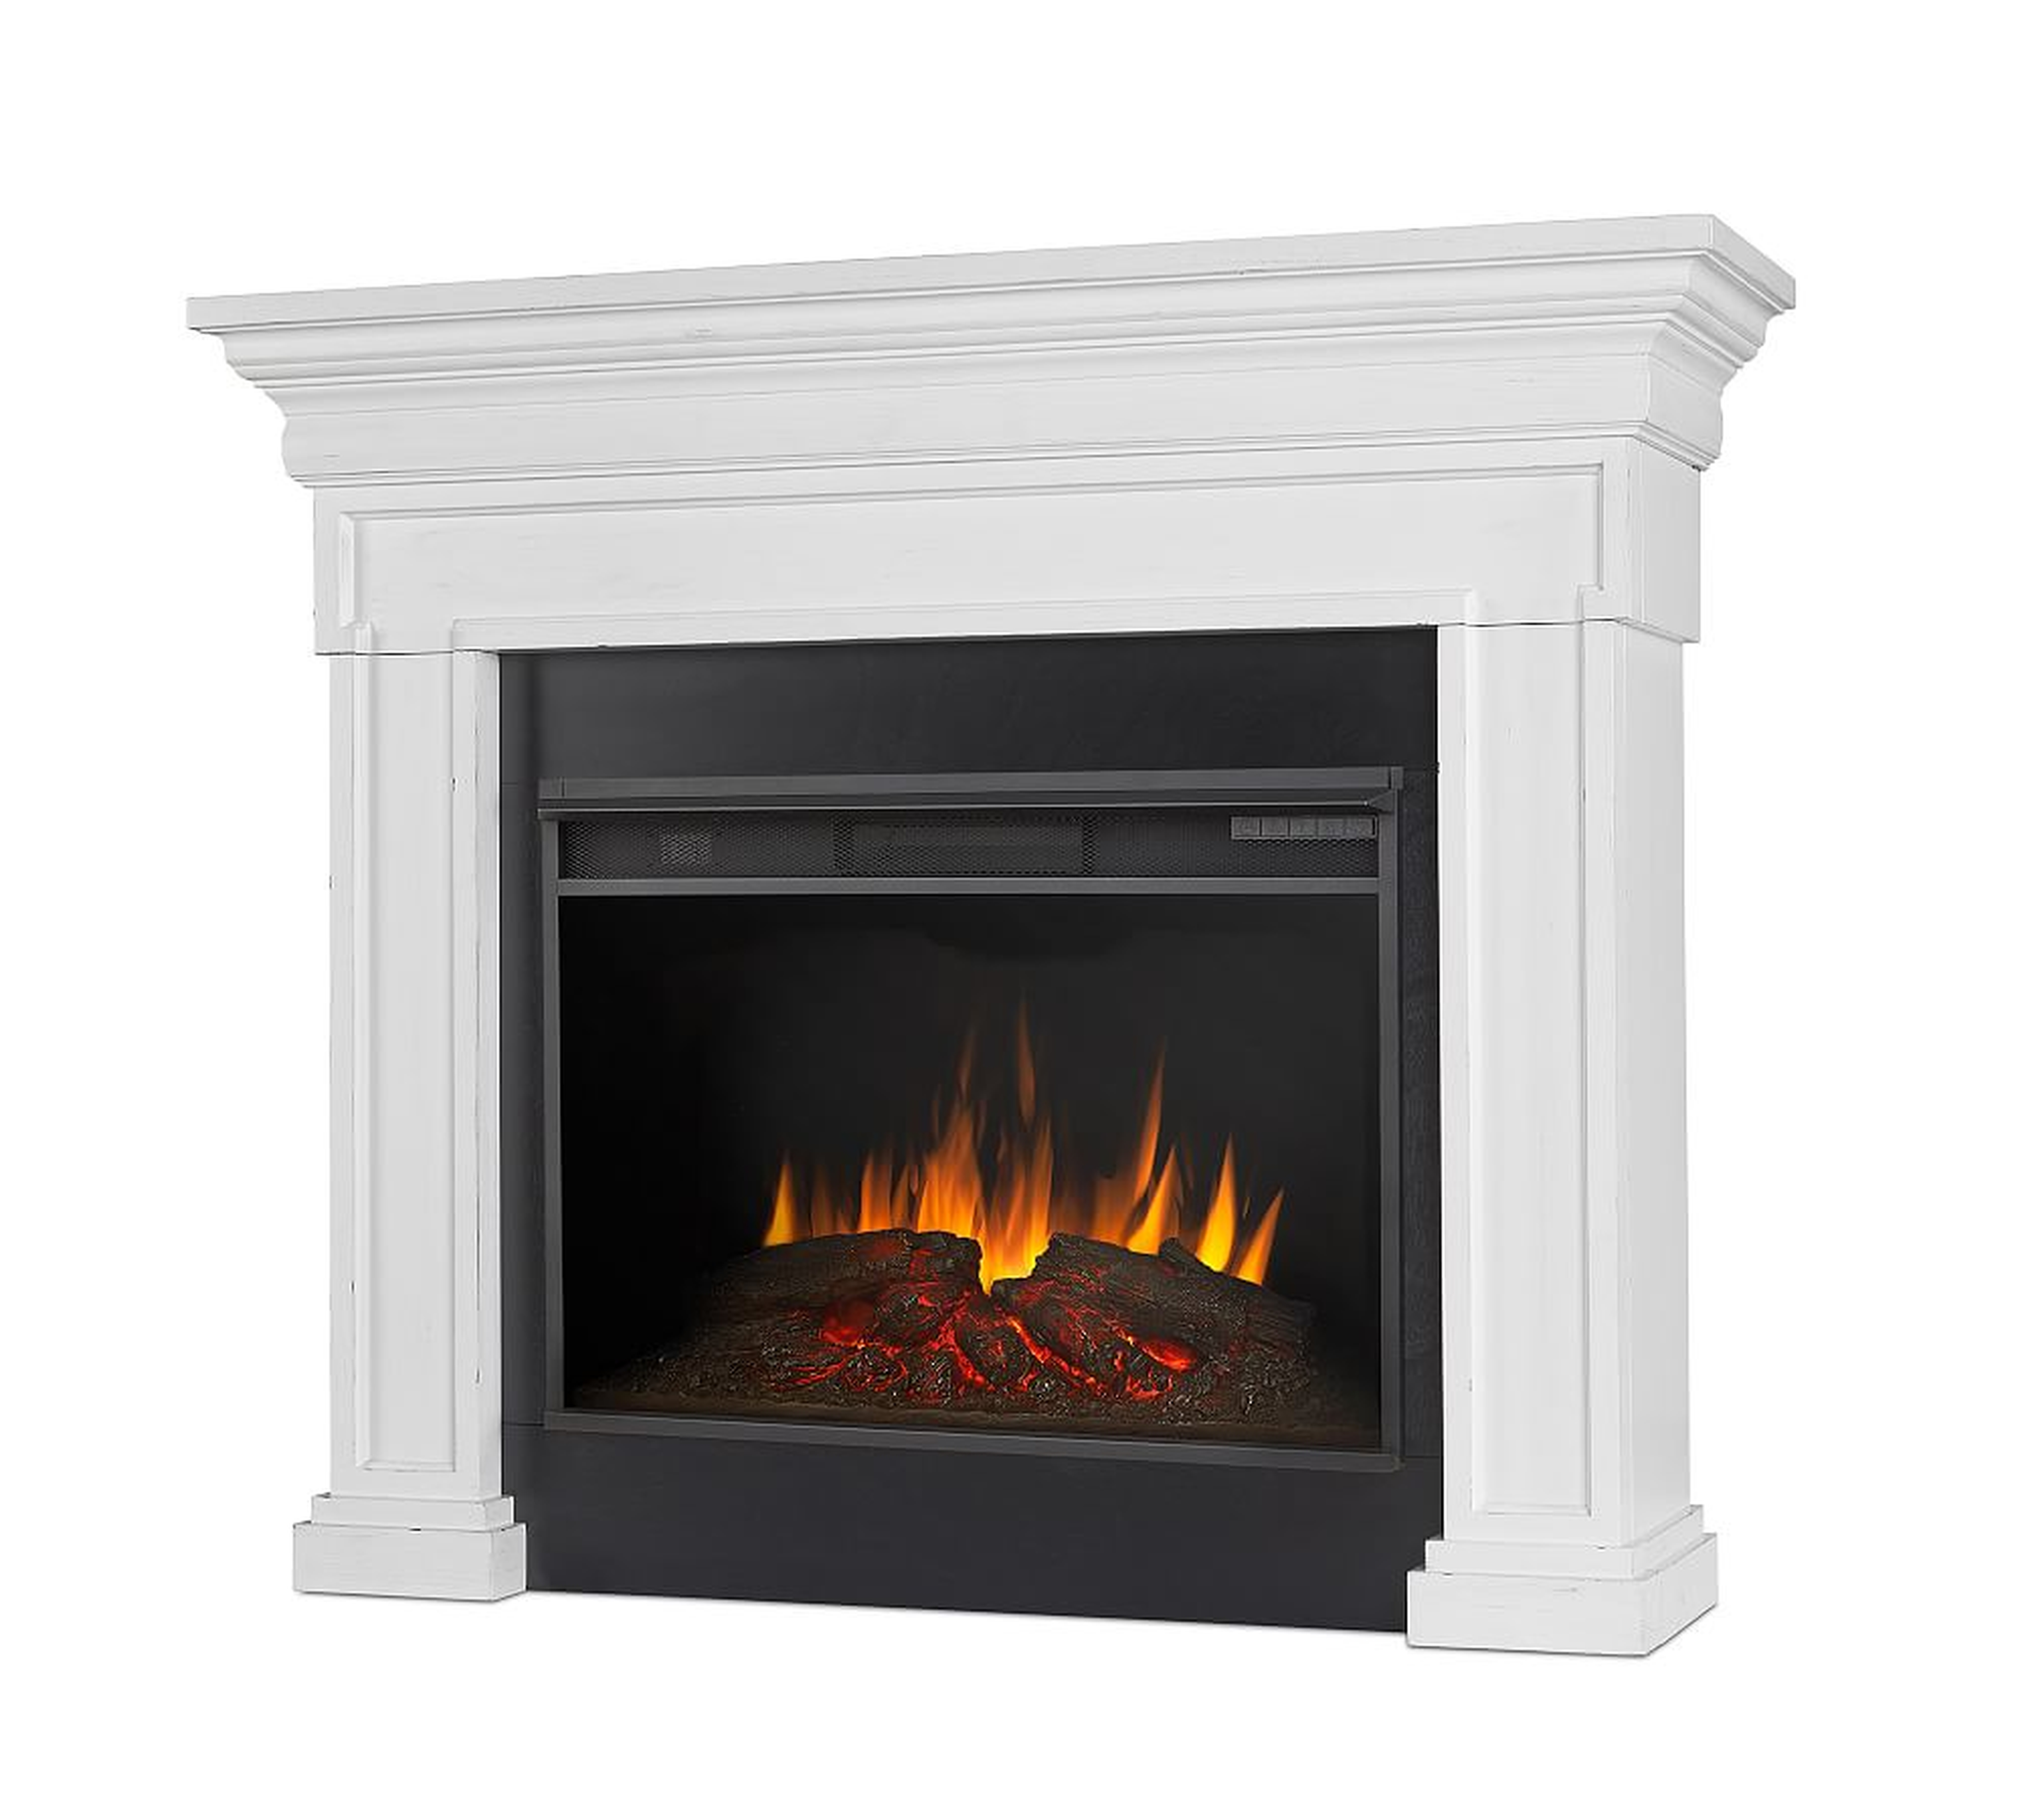 Emerson Grand Electric Fireplace, Rustic White - Pottery Barn